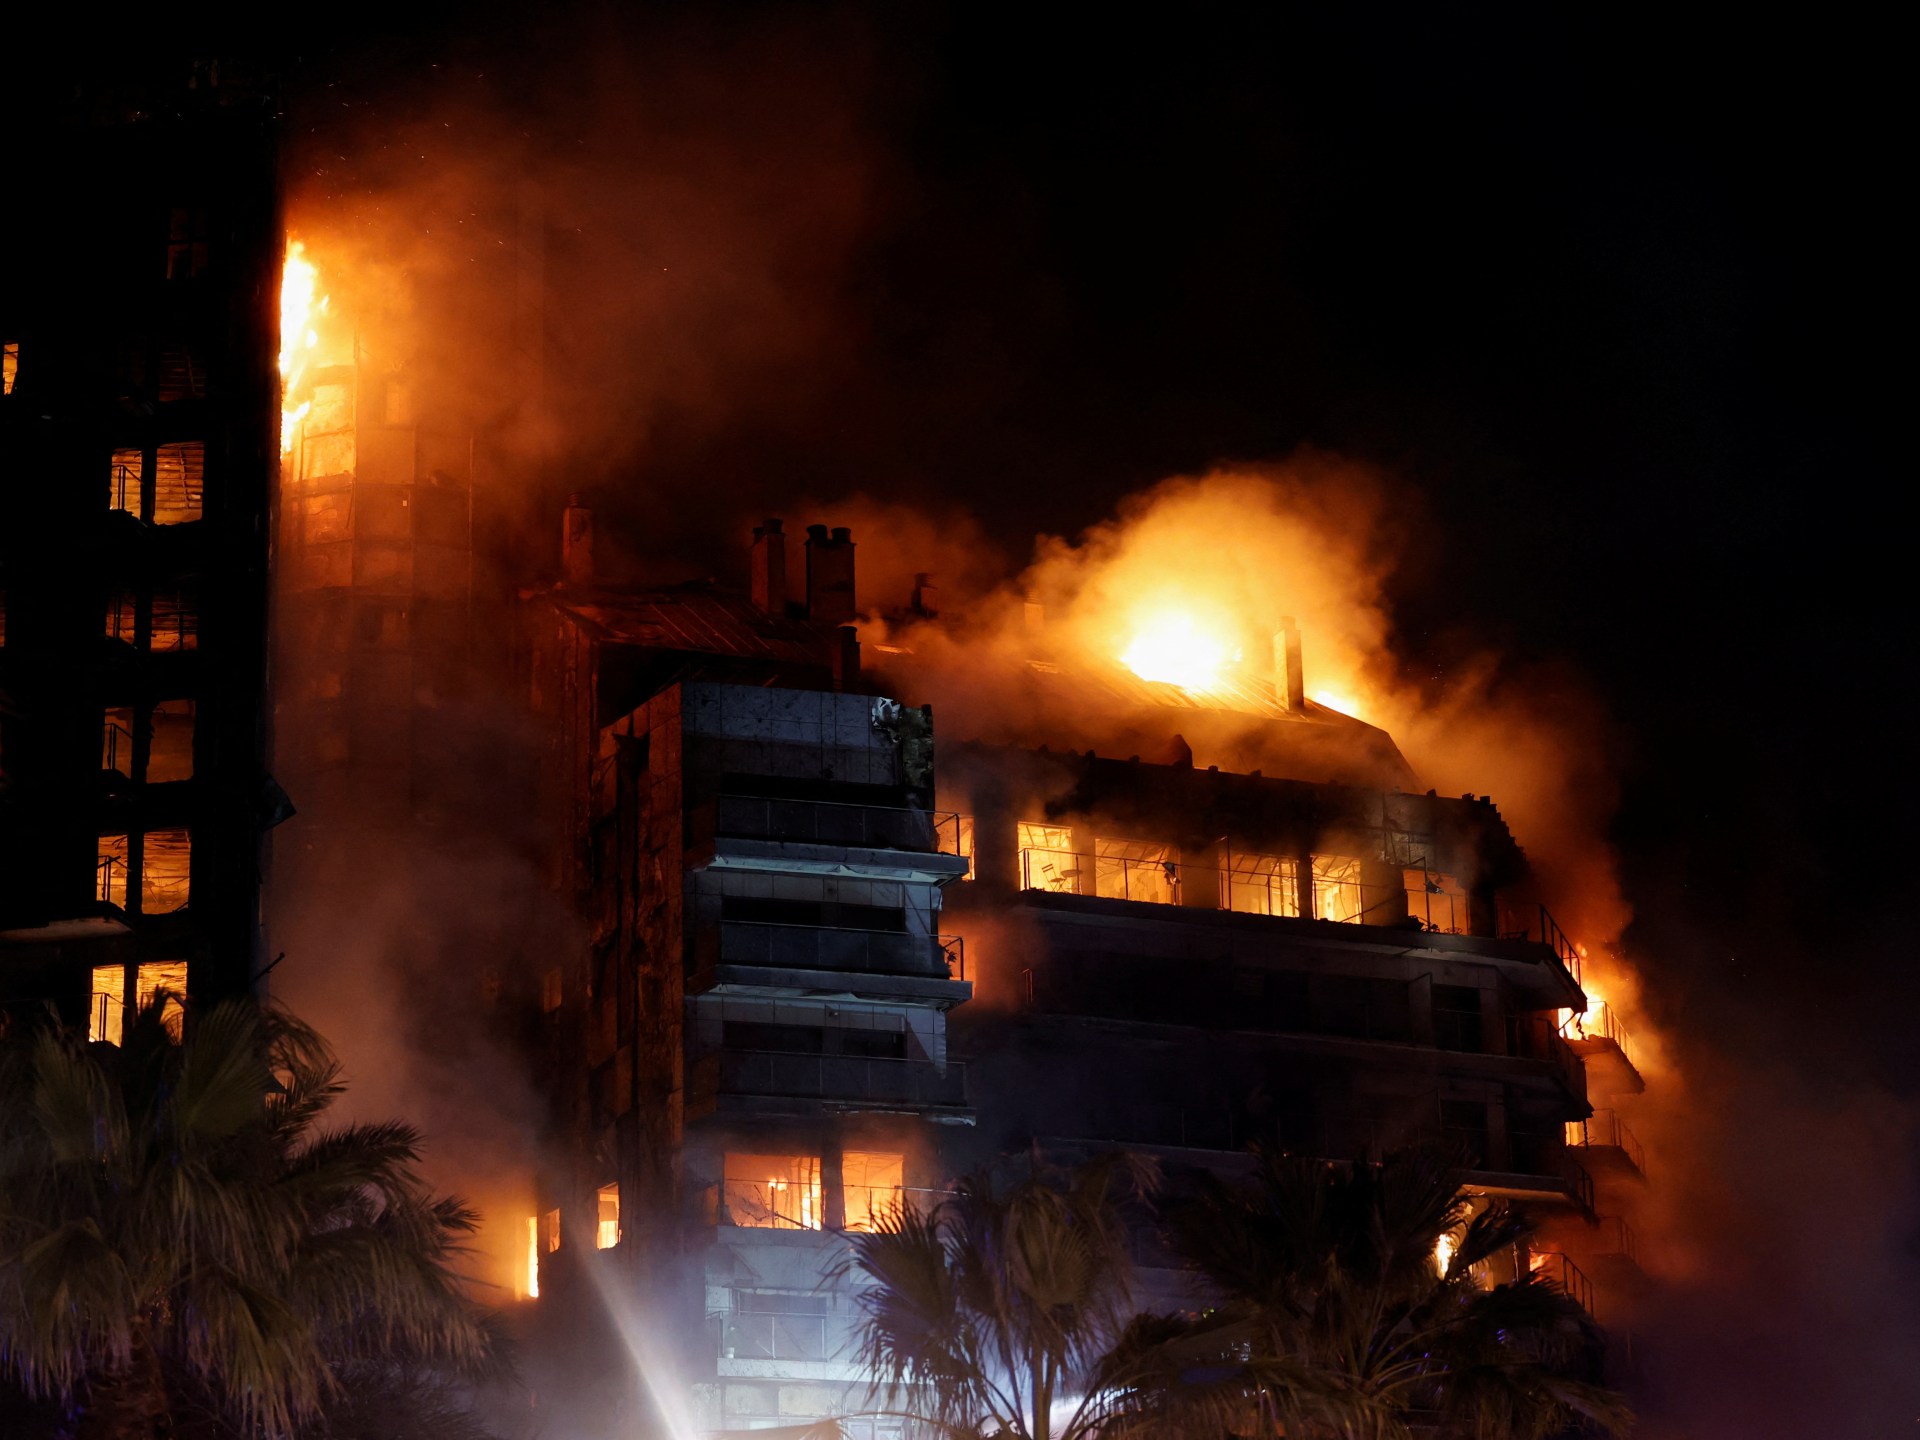 Deadly blaze rips through apartment block in Spain | Newsfeed